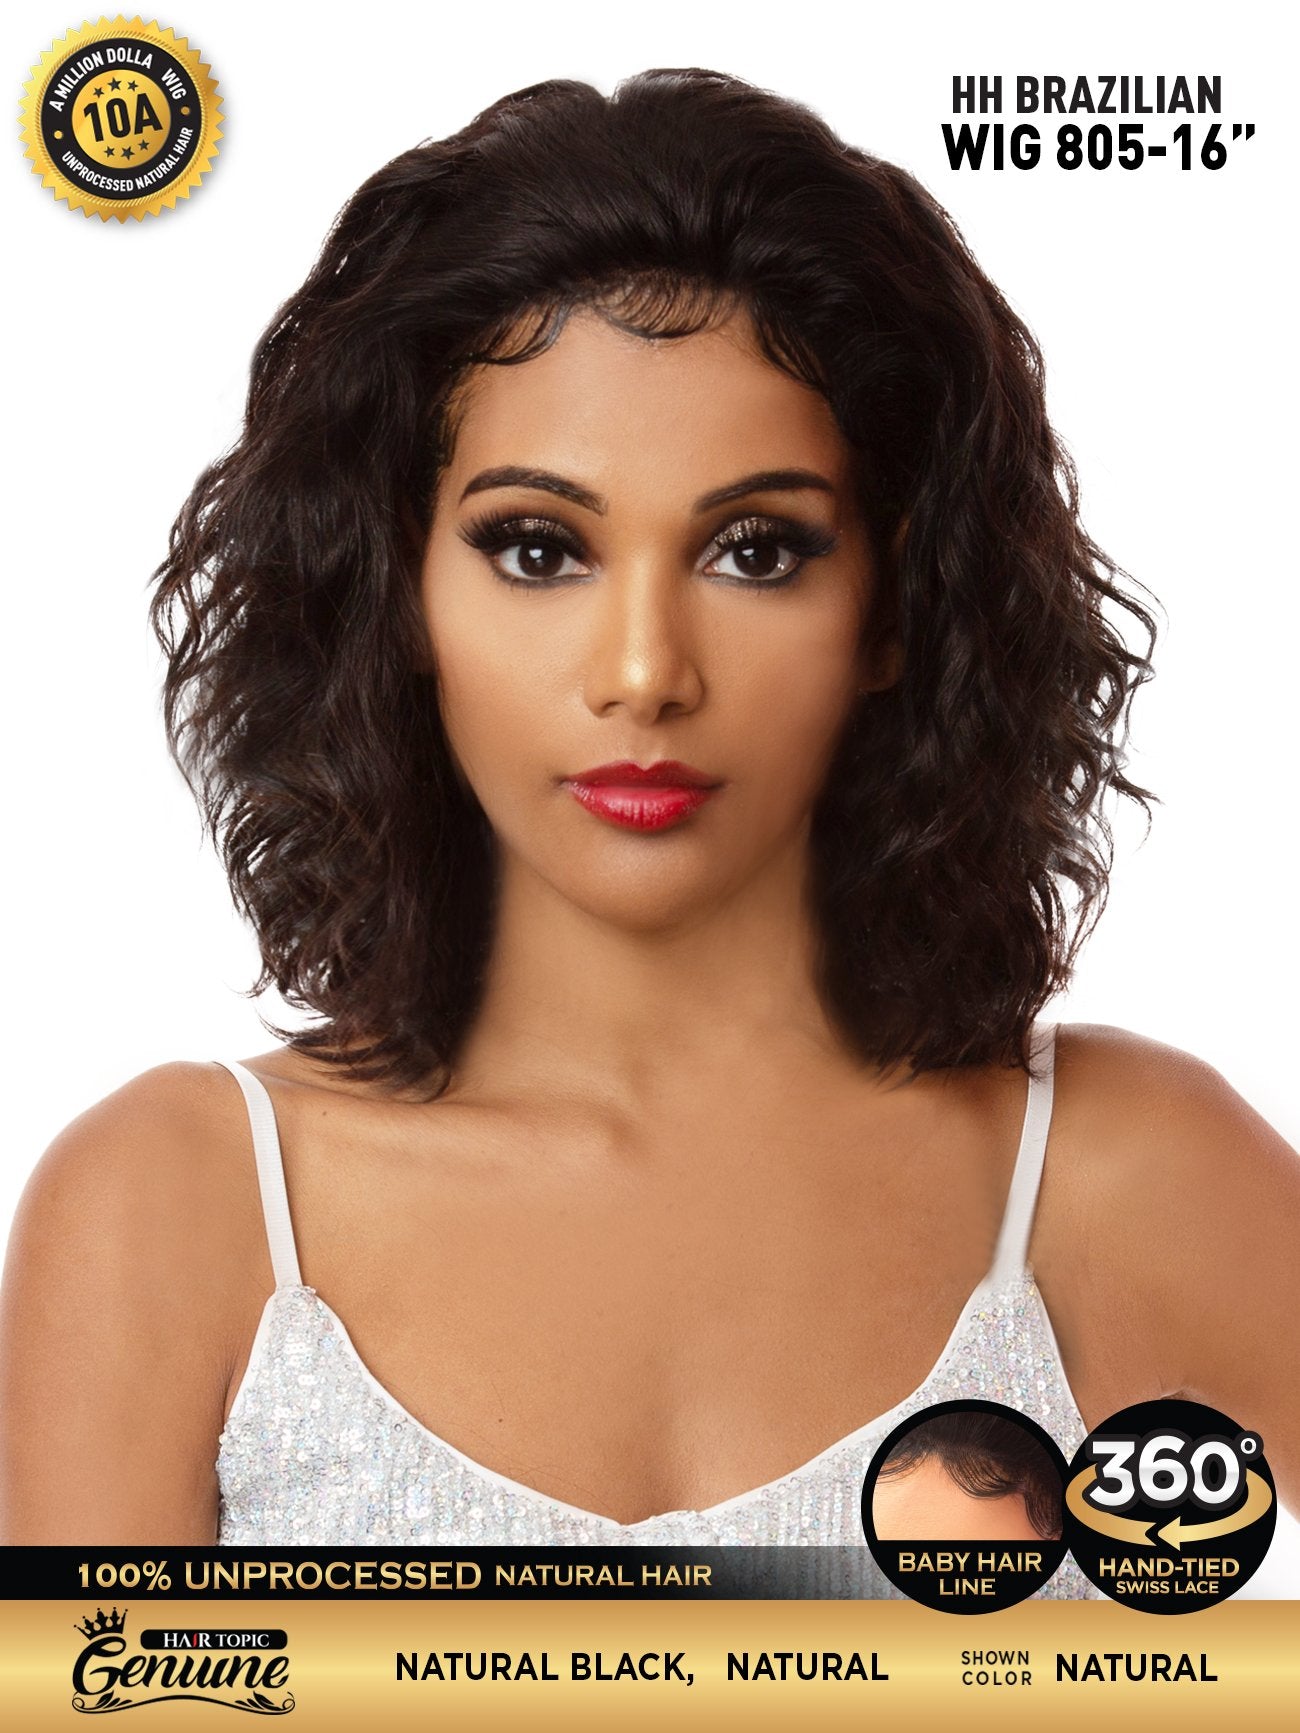 Hair Topic Genuine 10A HH Brazilian Lace 360 Wig 805-16